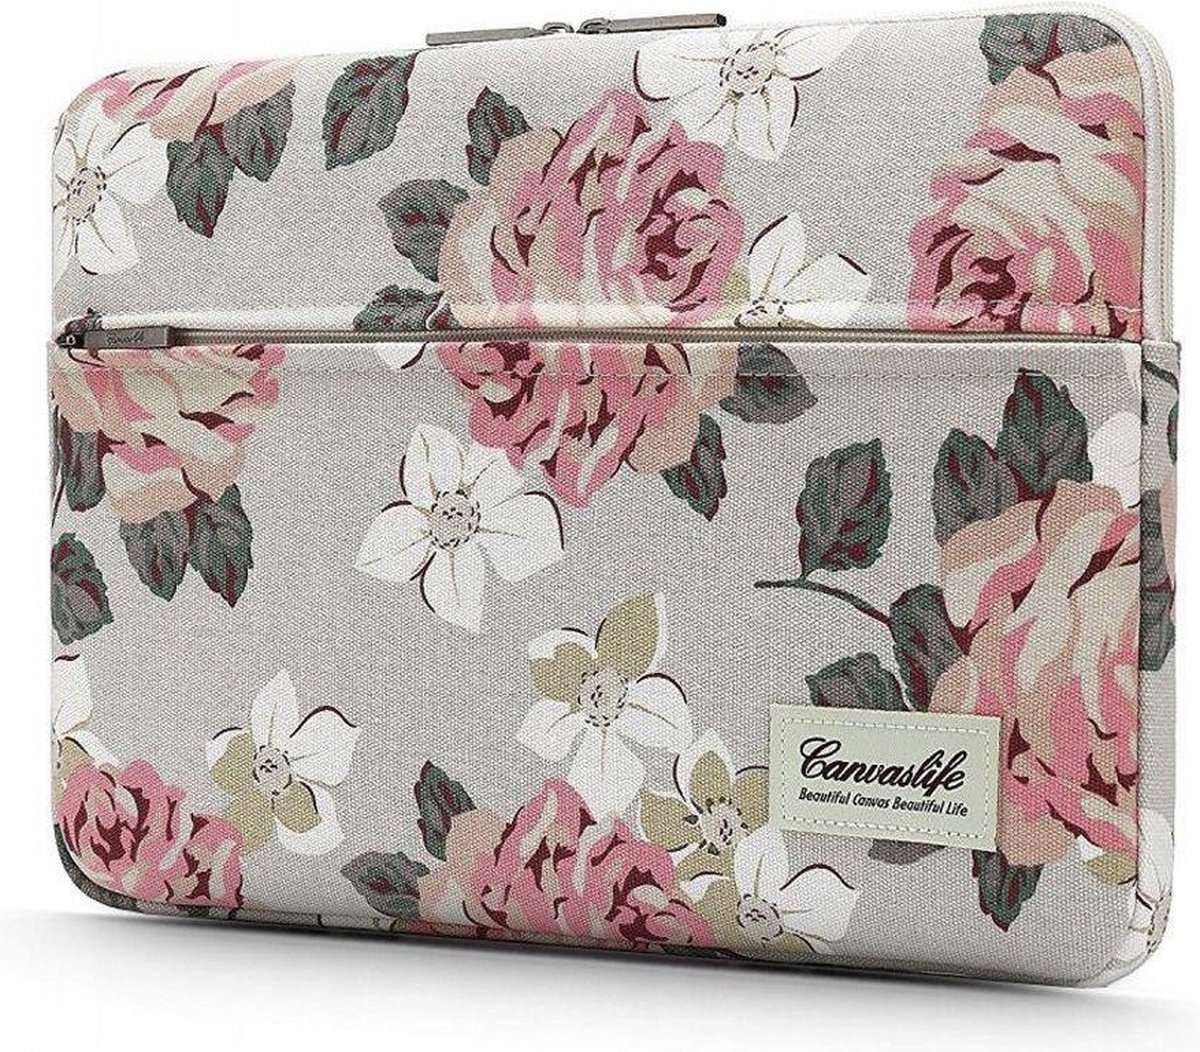 Canvaslife - Laptop Sleeve - 13 / 14 inch - White Rose